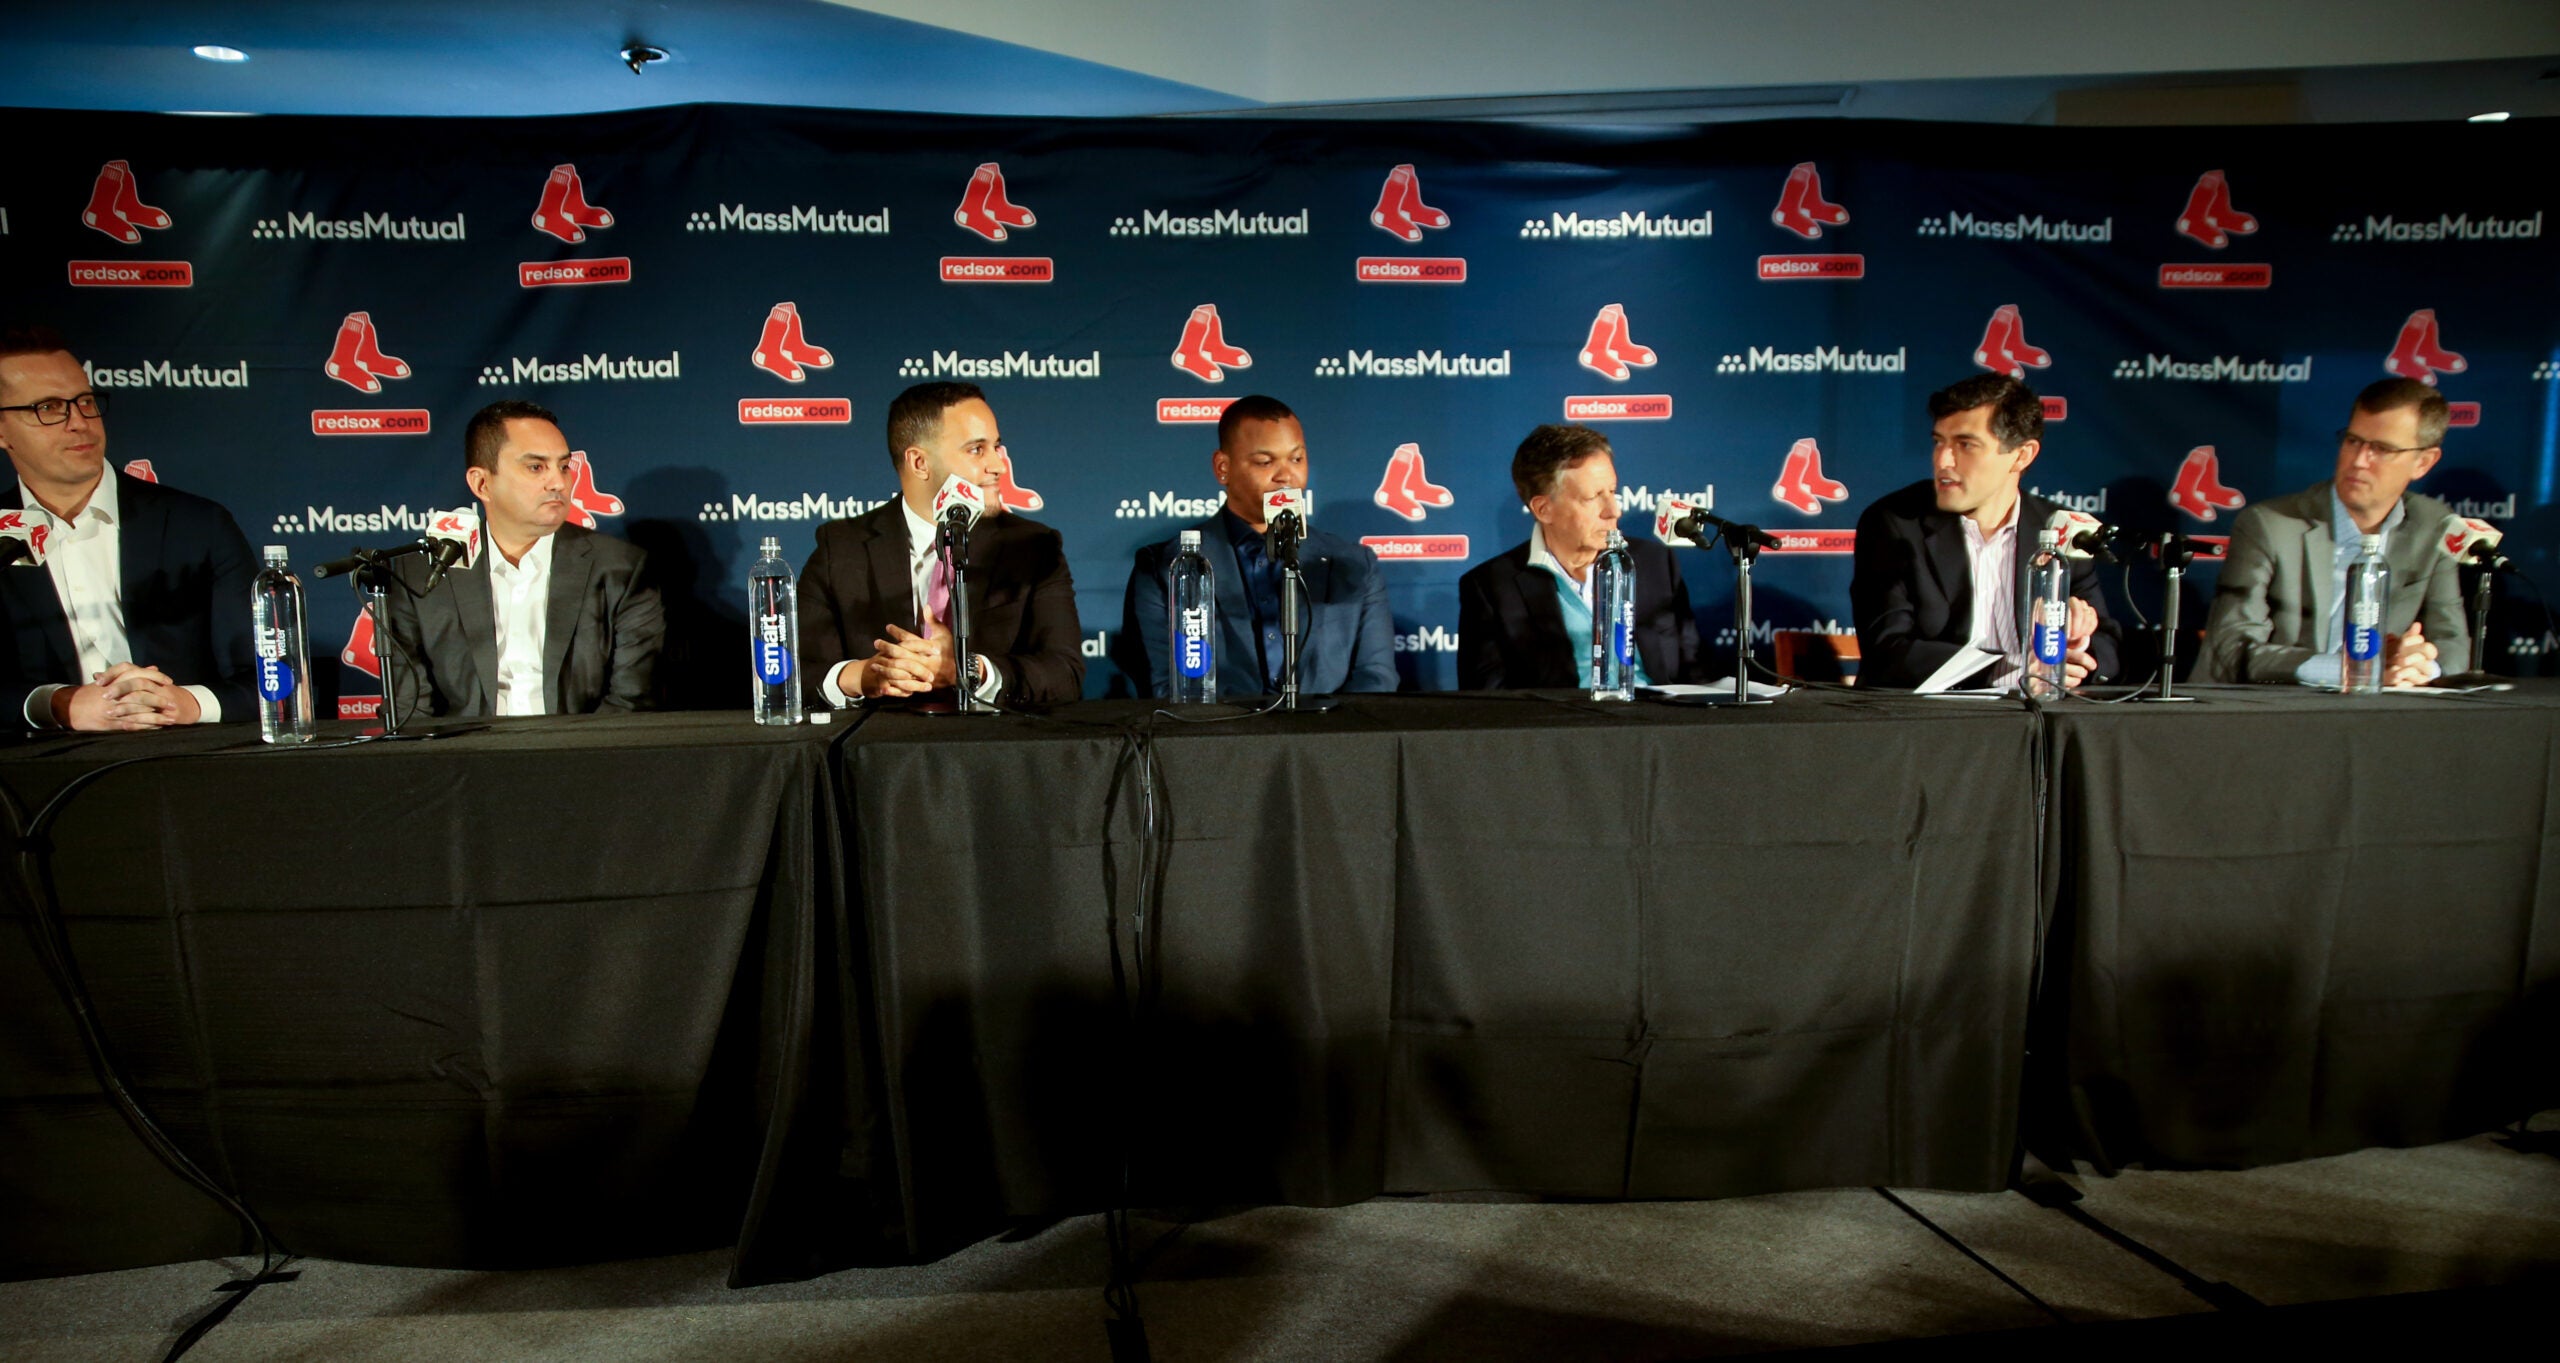 Rafael Devers was smiling in the center of a packed dais for Wednesday's official announcement of his 10-year contract extension with the Red Sox.